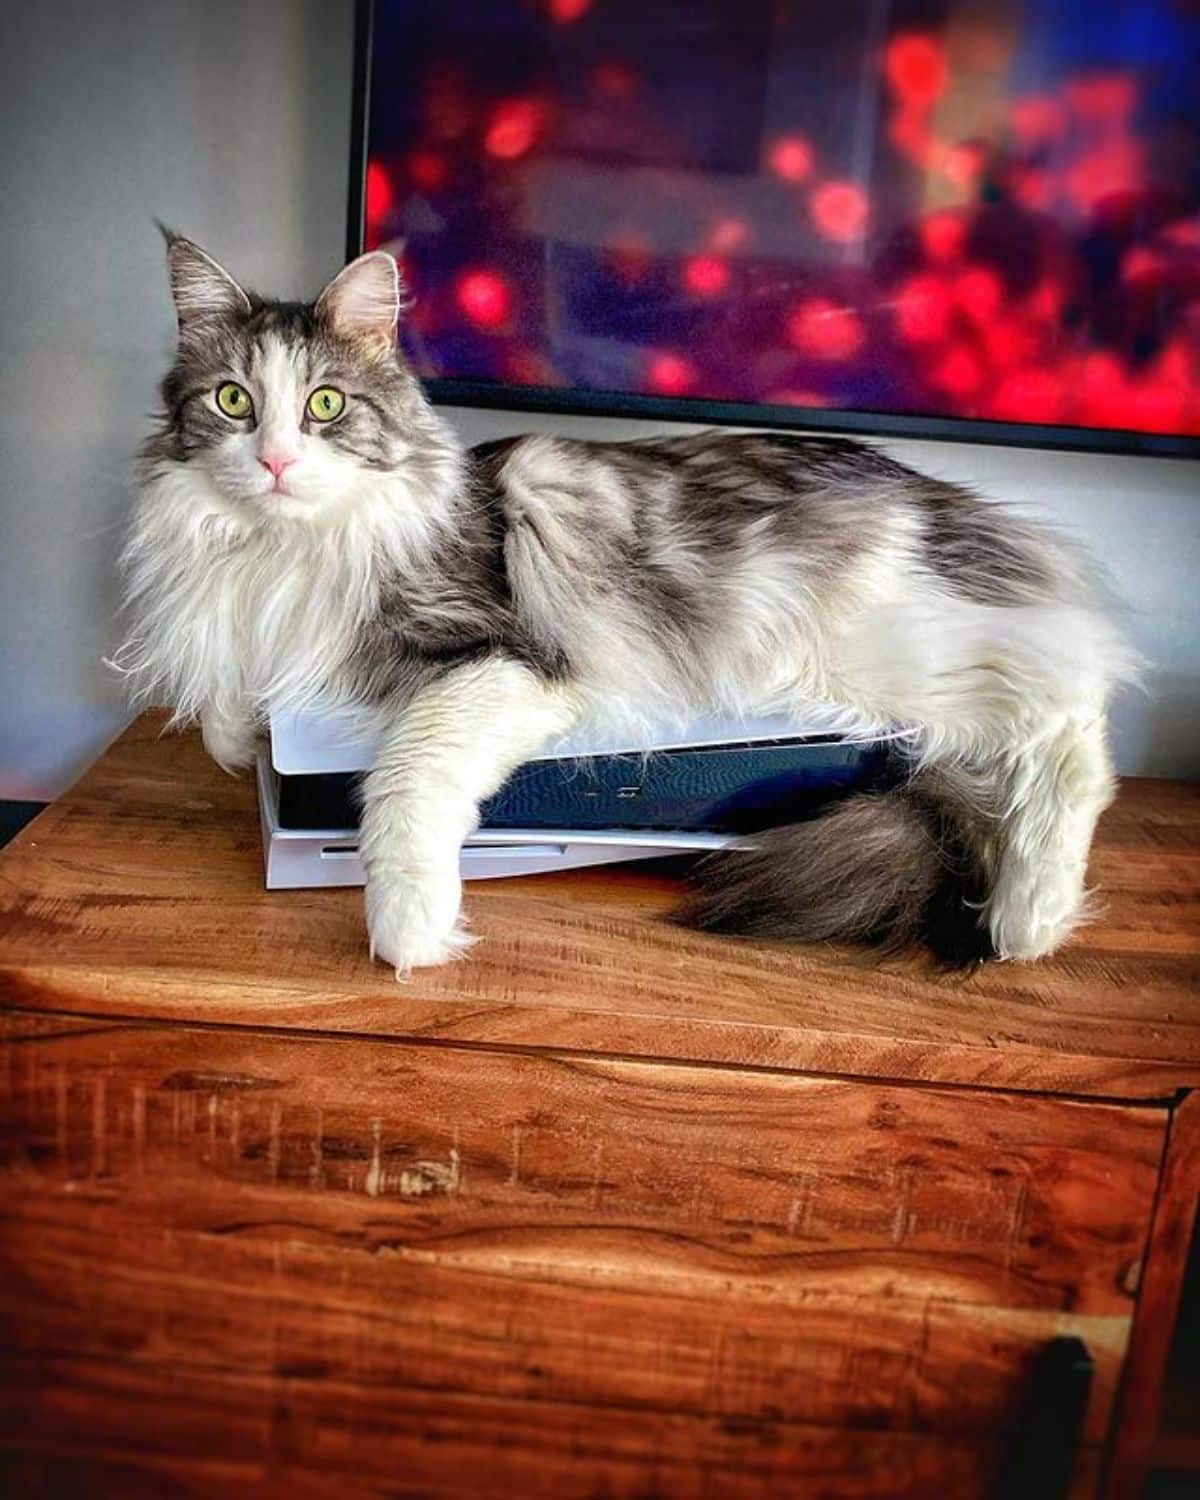 A fluffy gray maine coon lying on a game console.